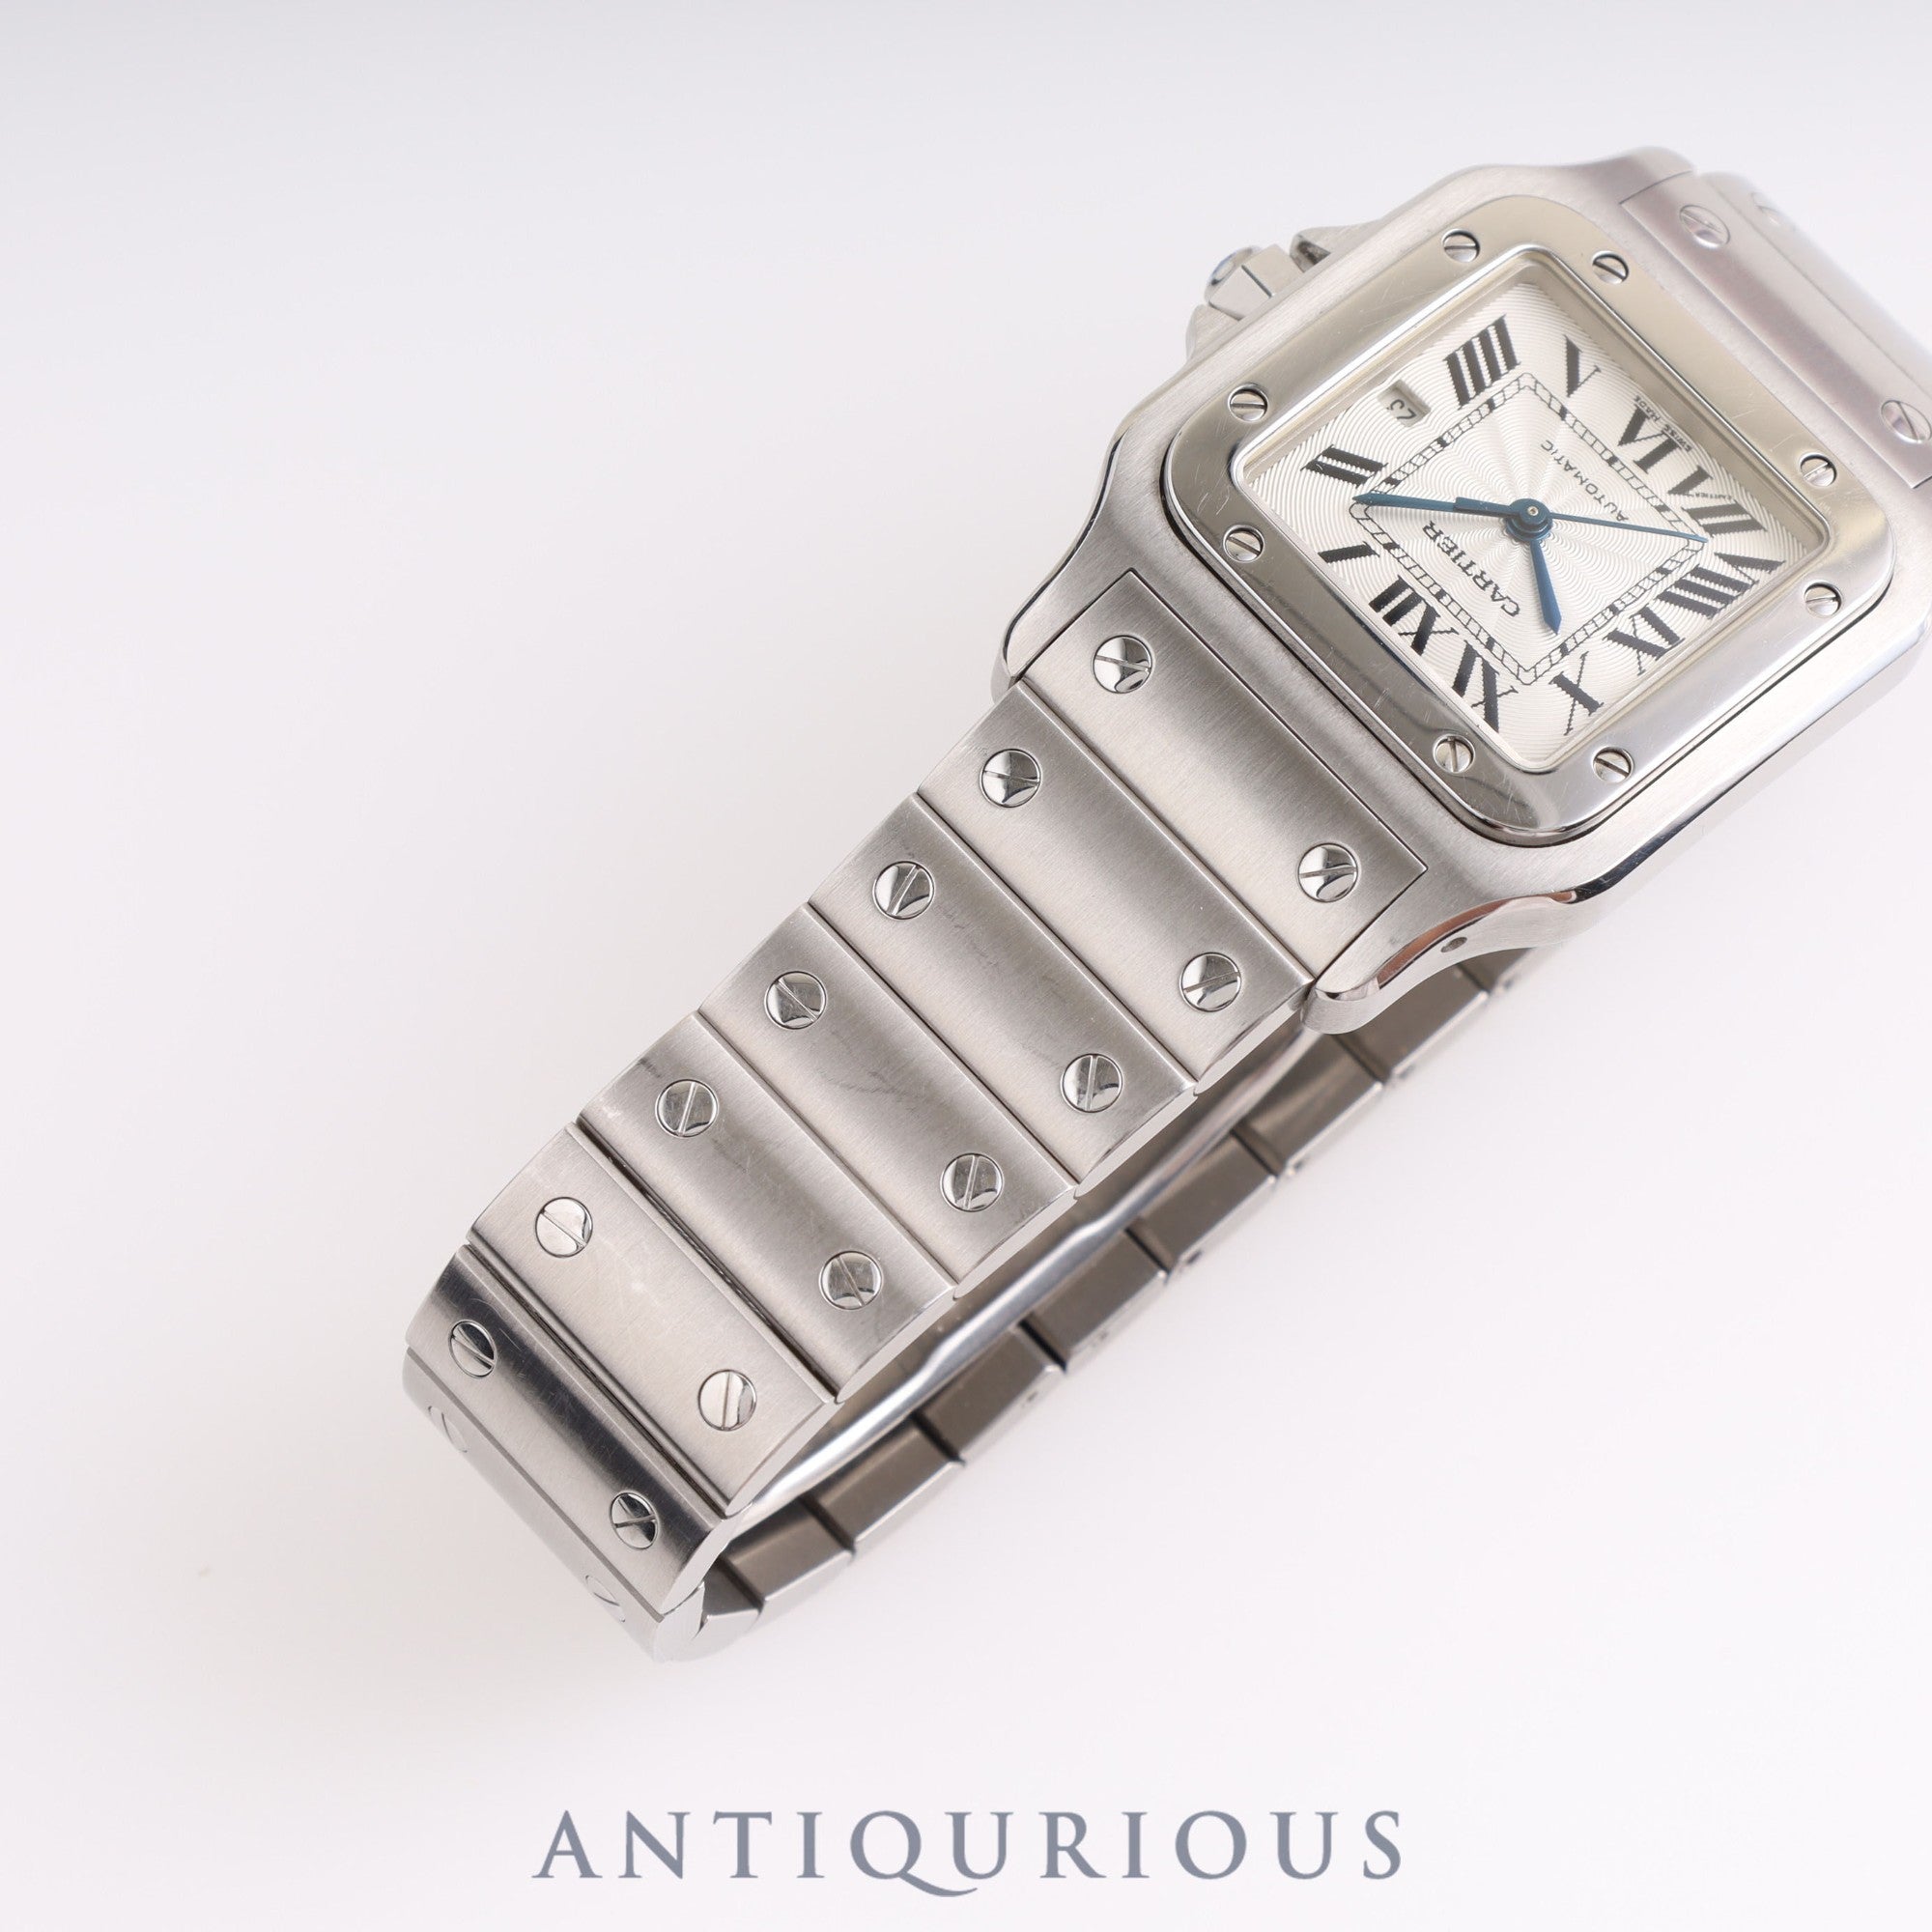 CARTIER SANTOS GALBEE LM W20055D6 2319 Automatic winding guilloche dial box and instructions